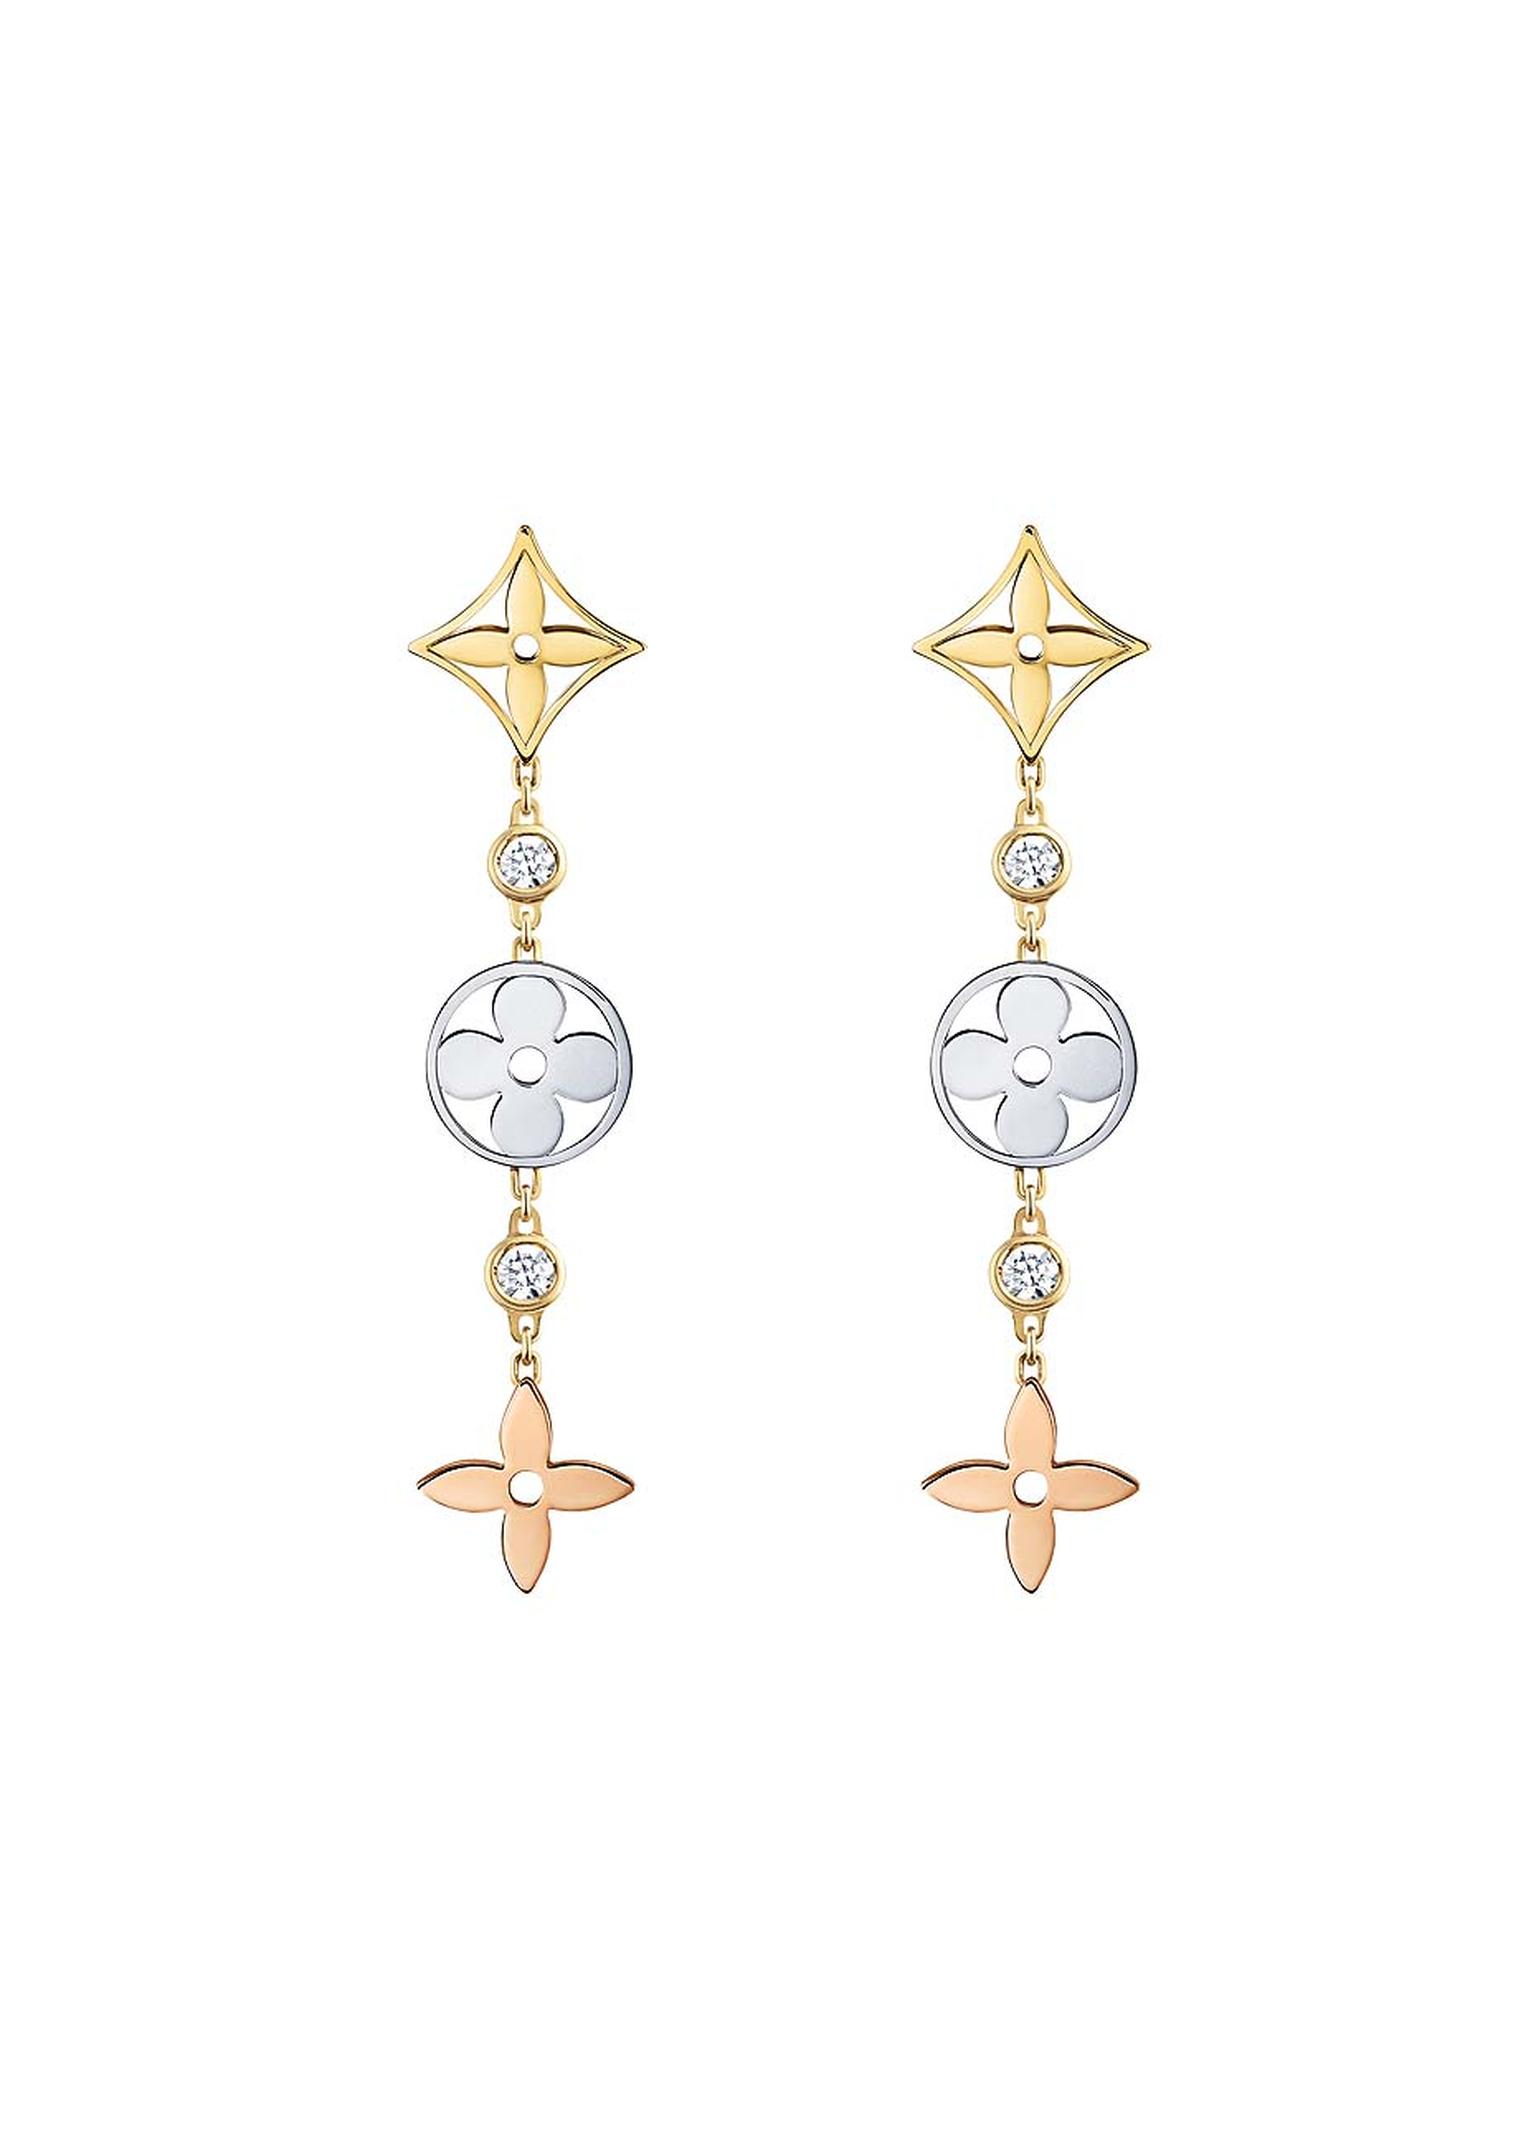 Louis Vuitton earrings in pink, yellow and white gold with diamonds from the new Monogram Idylle collection (£2,110).